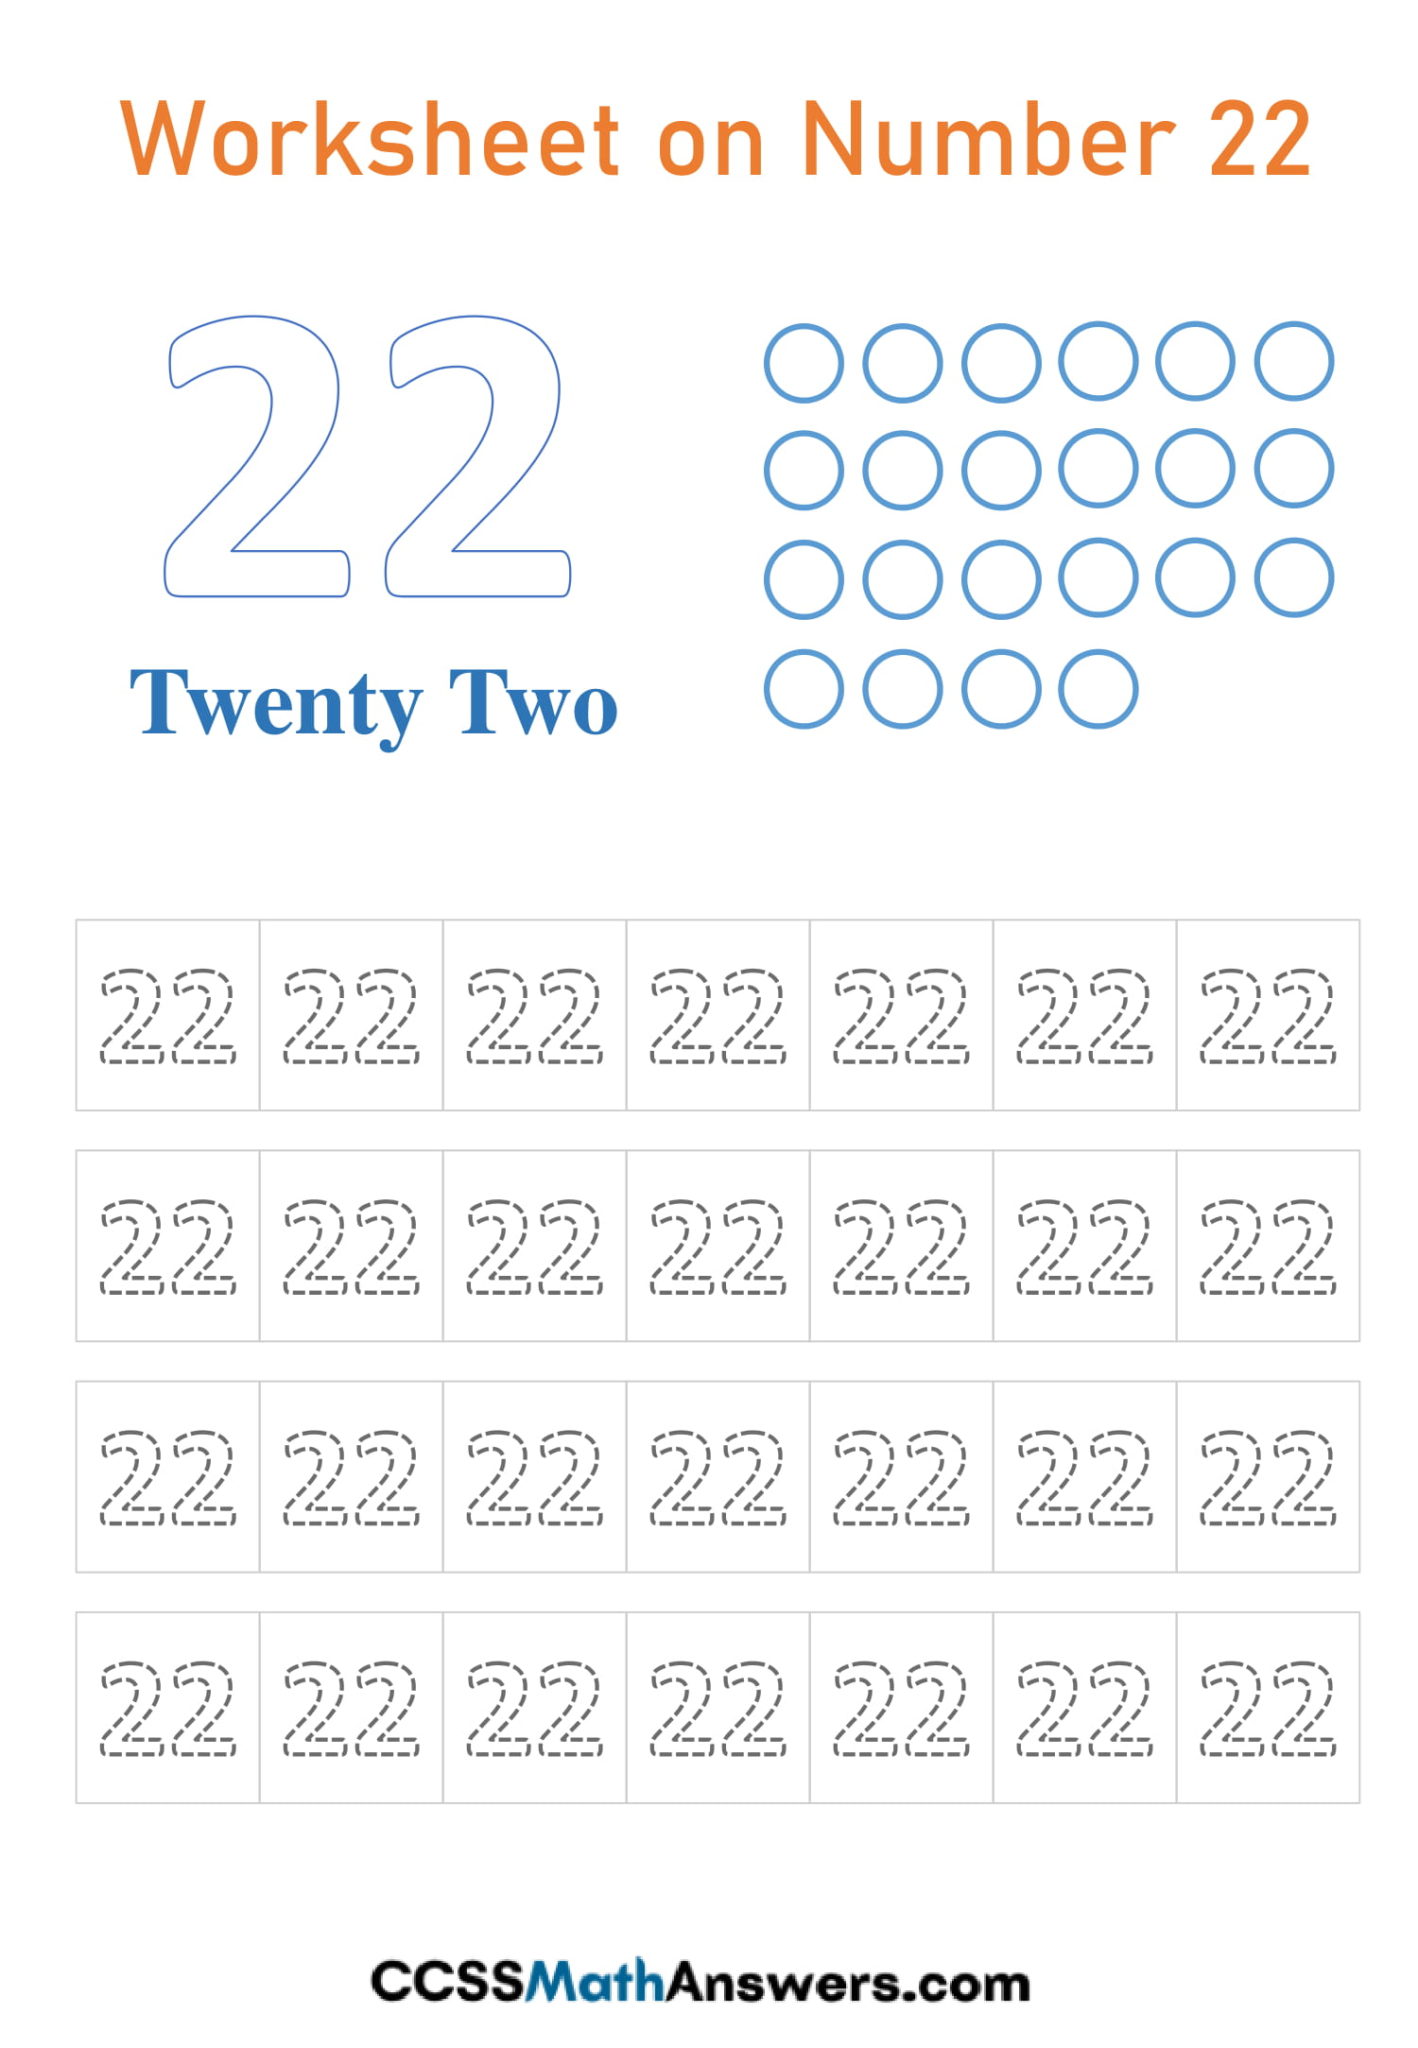 Worksheets For The Number 22